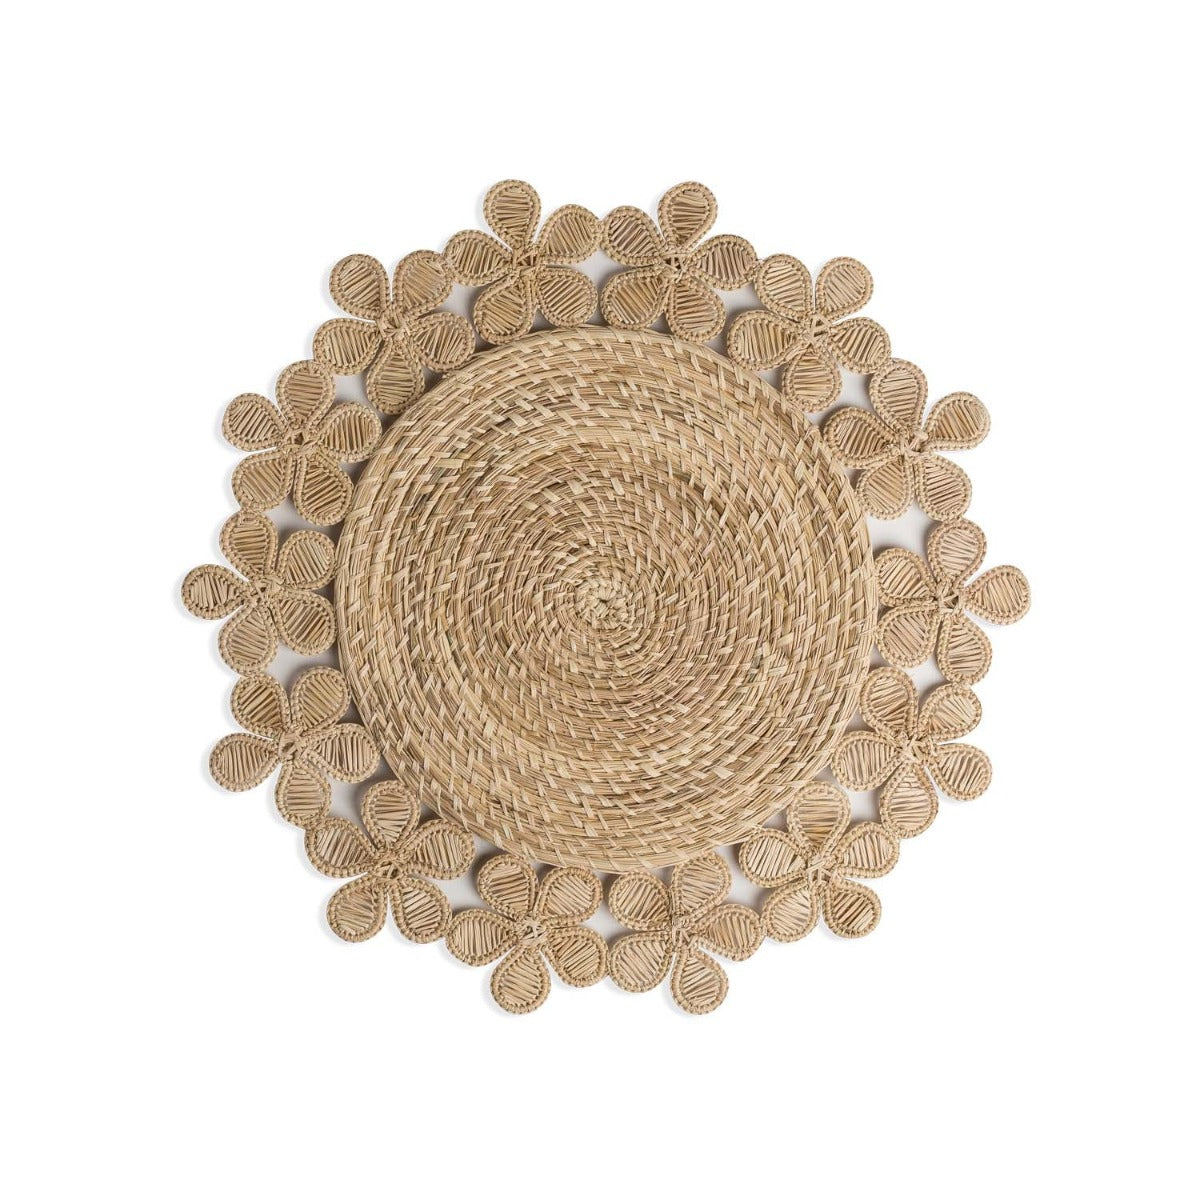 Iraca Palm Flower Border Placemats, Set of 4